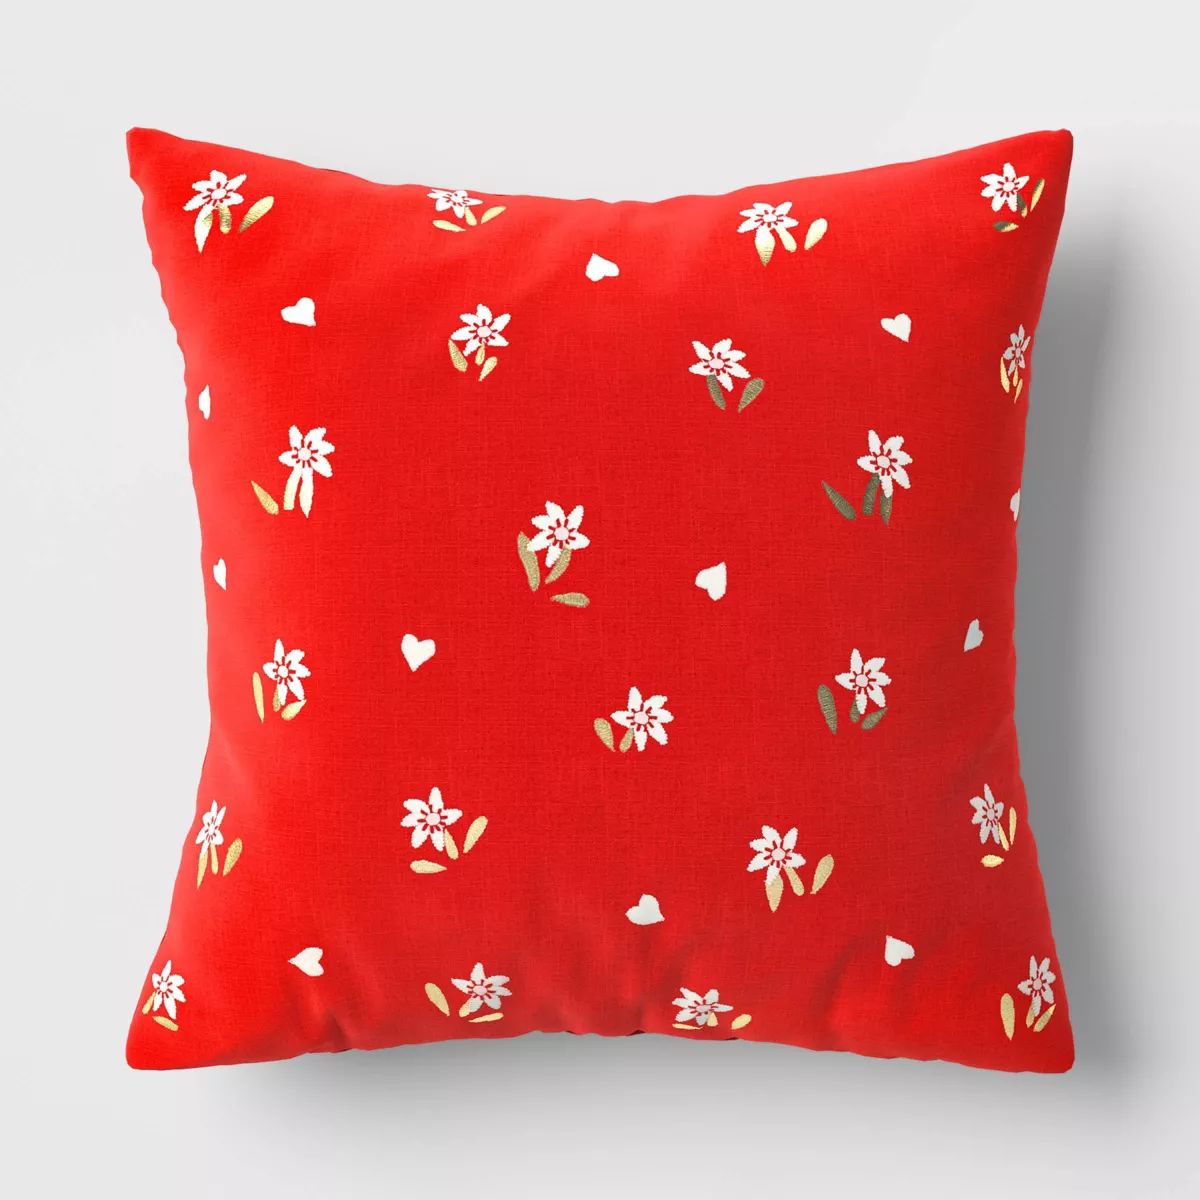 Square Embroidered Floral and Hearts Pillow Red/Pink/Metallic Gold - Threshold™ | Target